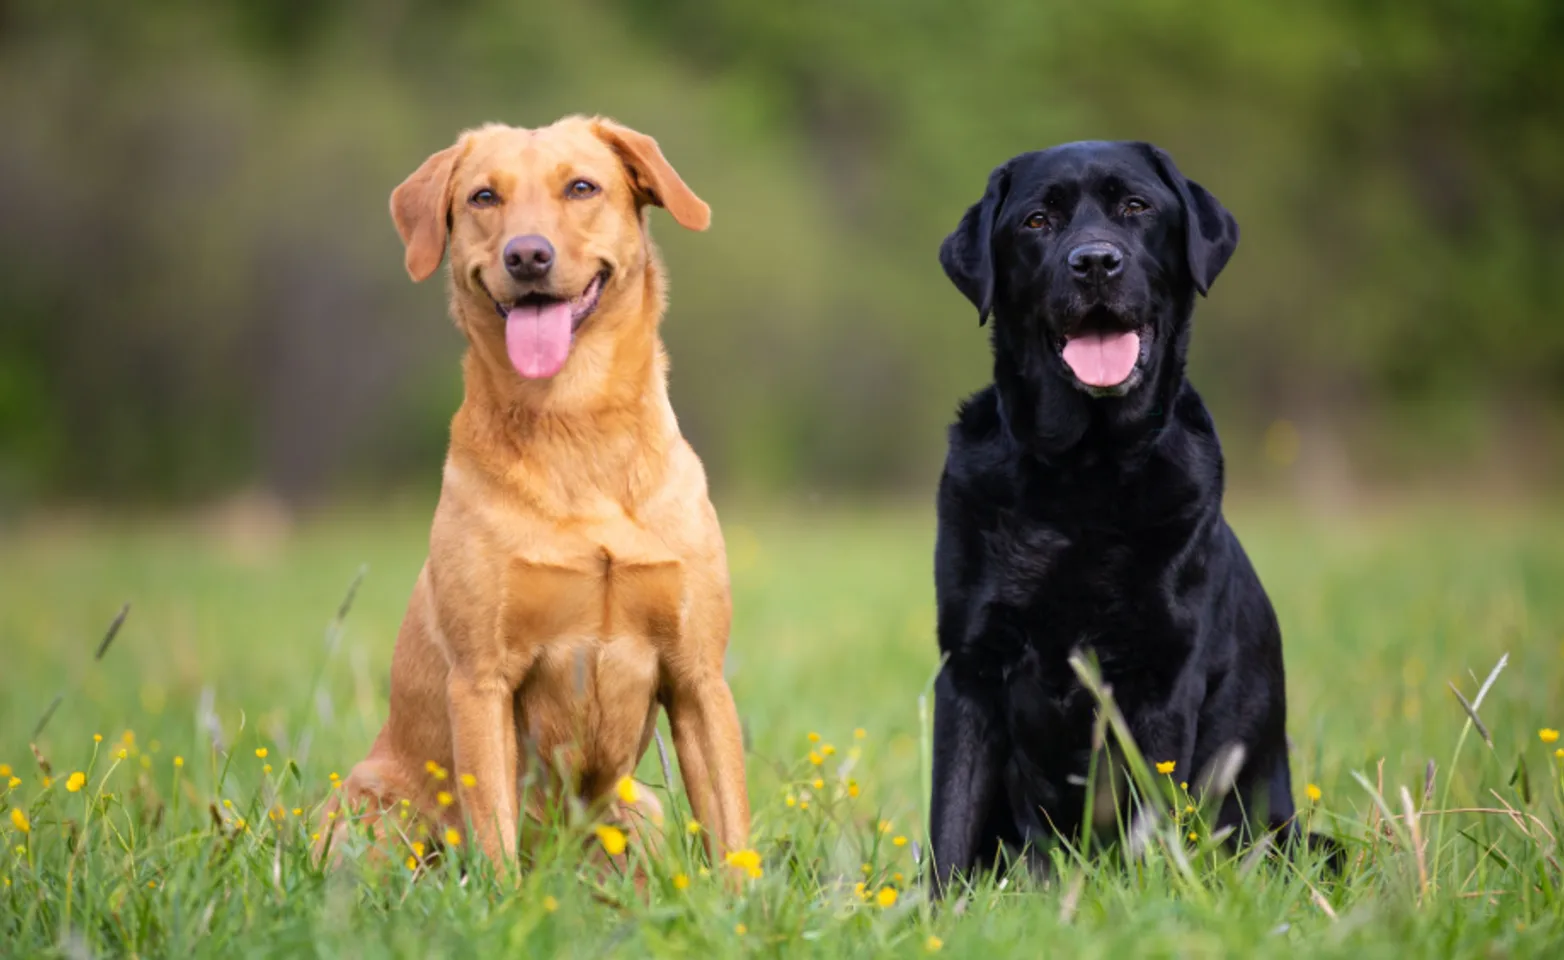 Two labradors sitting together